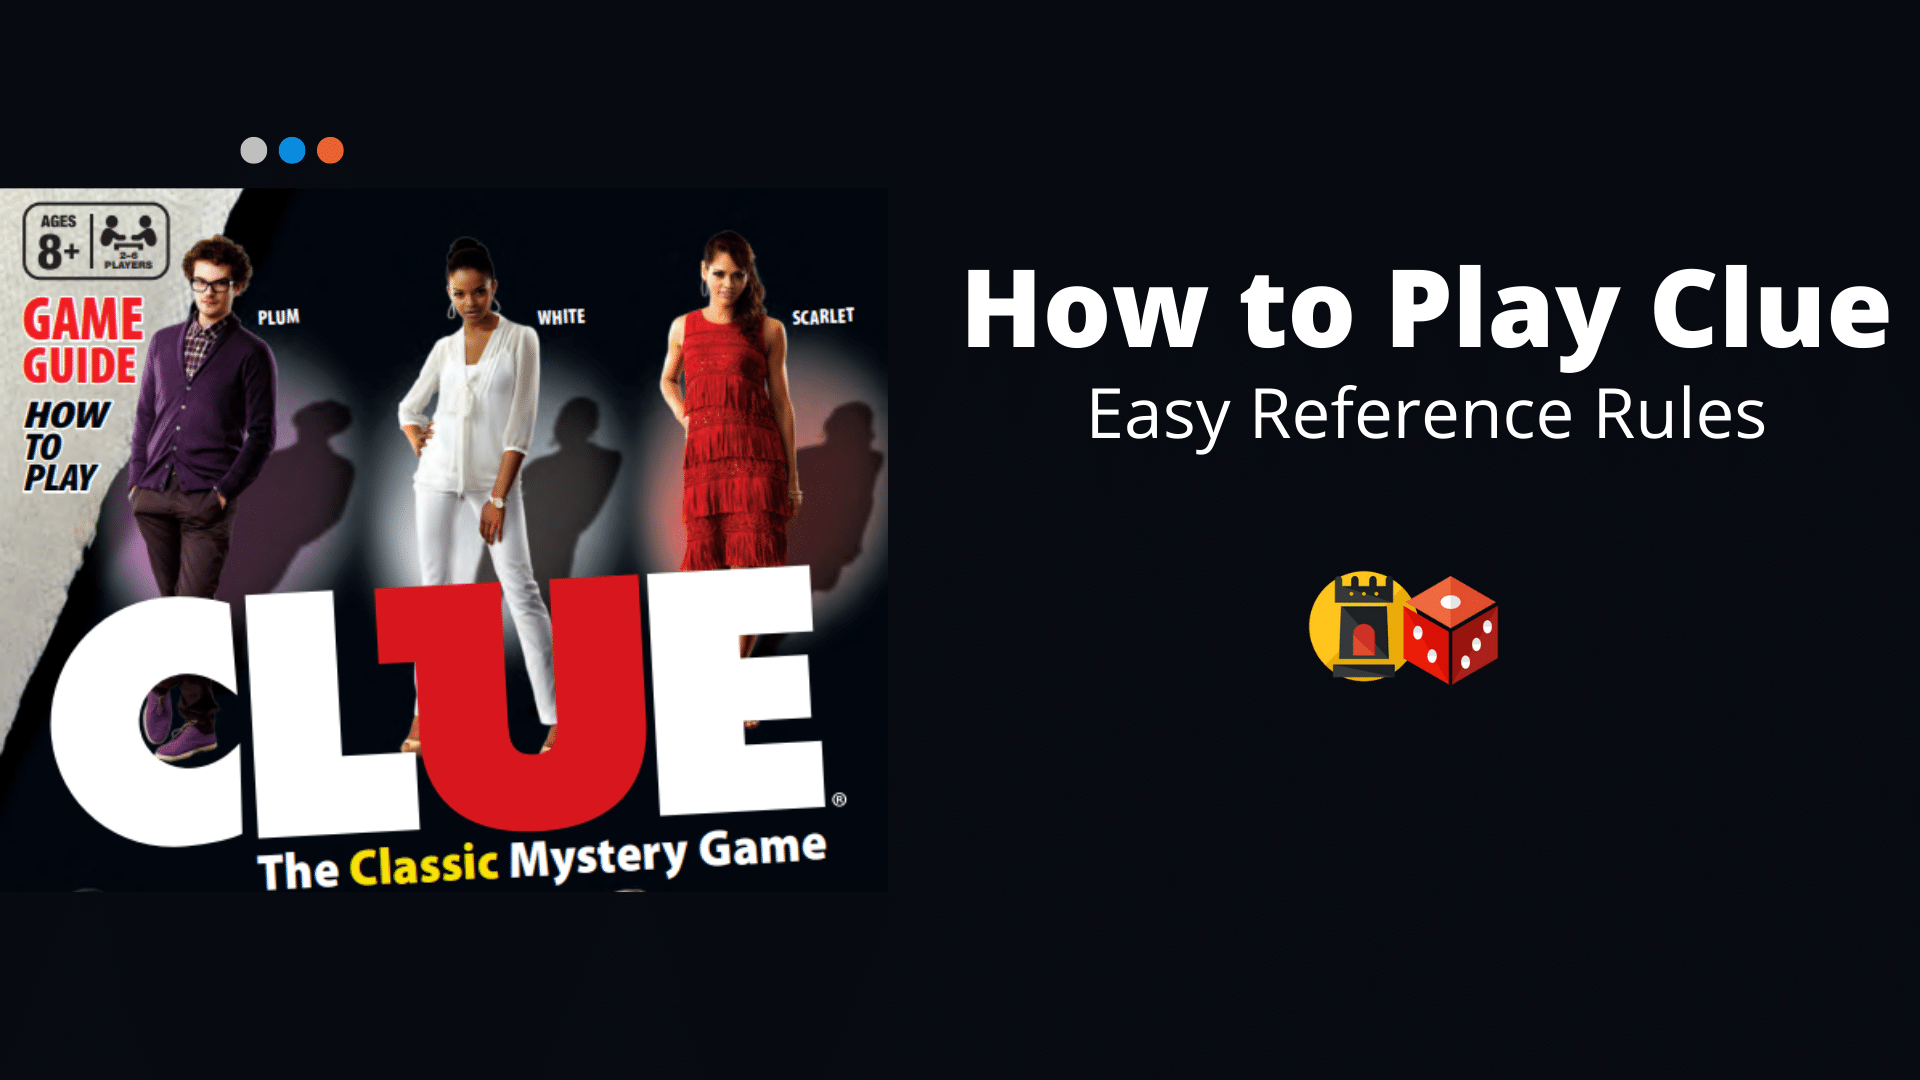 How to Play Clue Rules